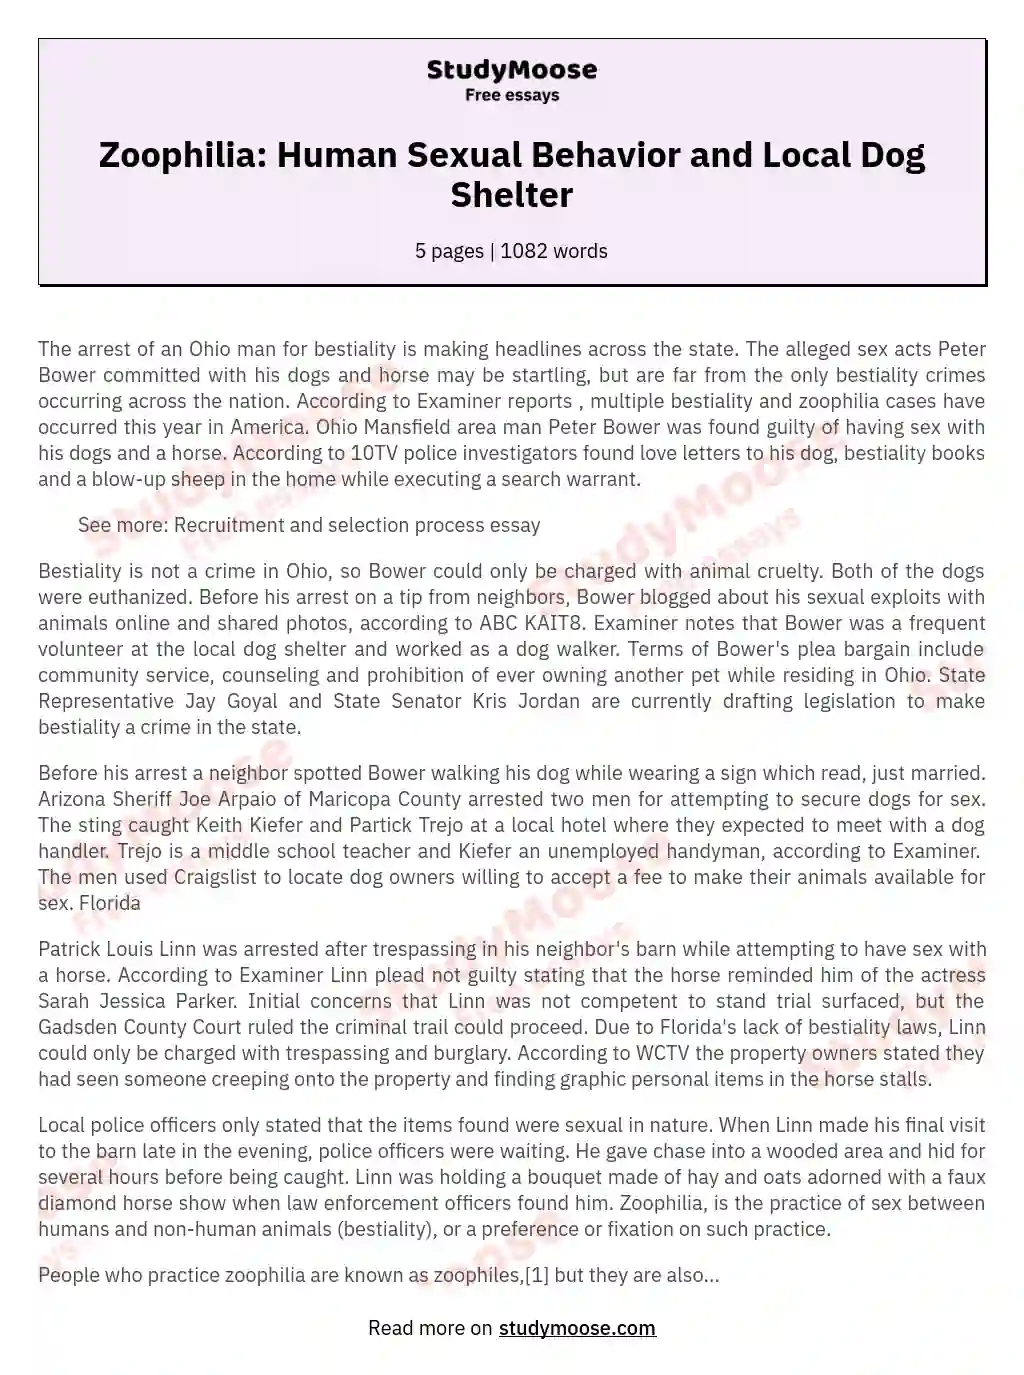 Zoophilia: Human Sexual Behavior and Local Dog Shelter essay